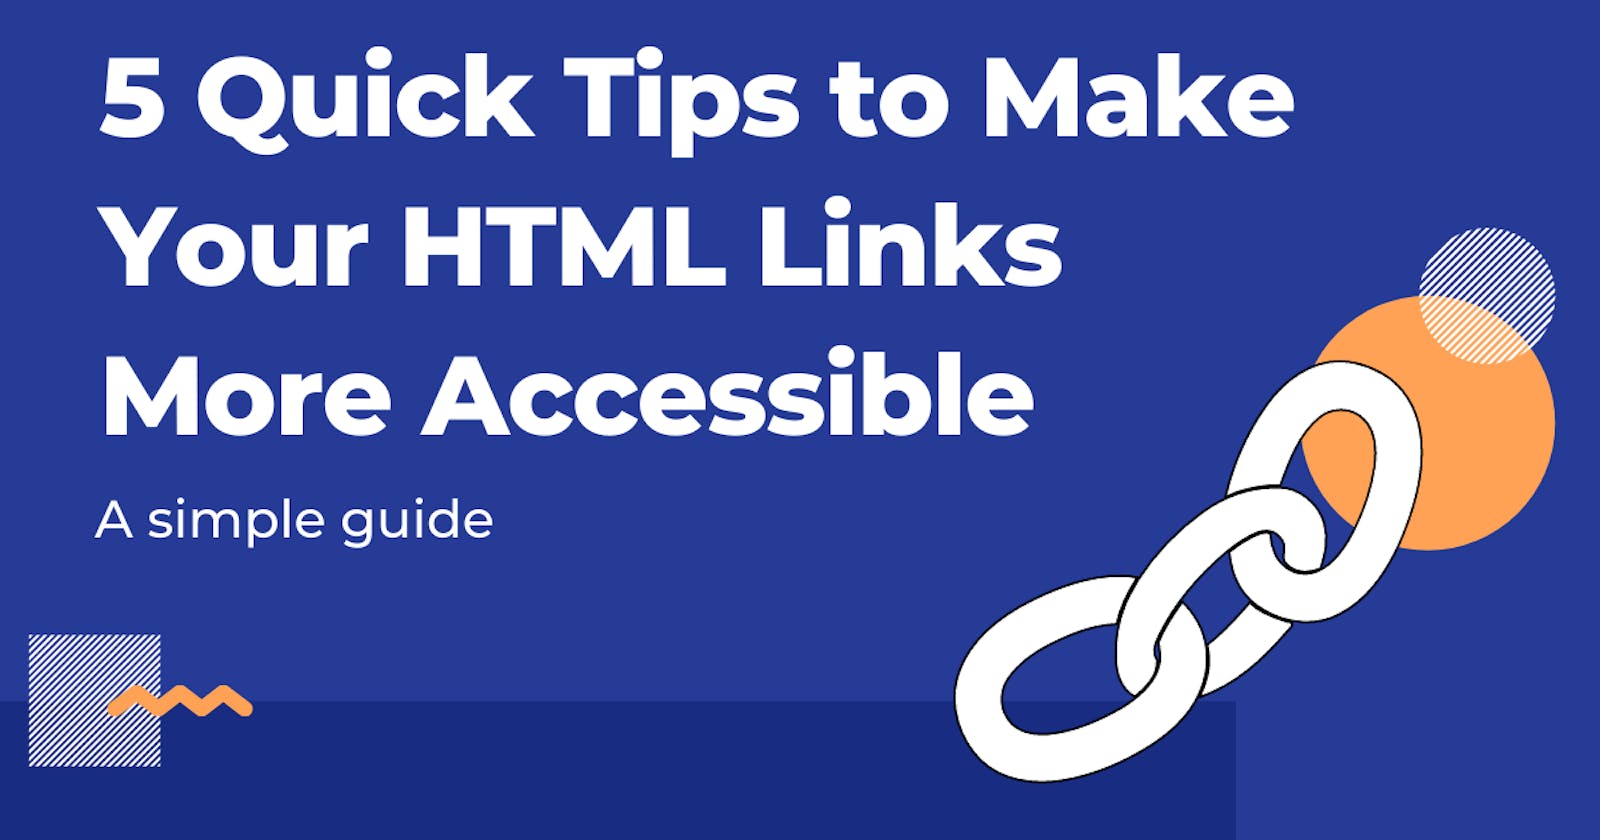 5 Quick tips to make your HTML links more accessible